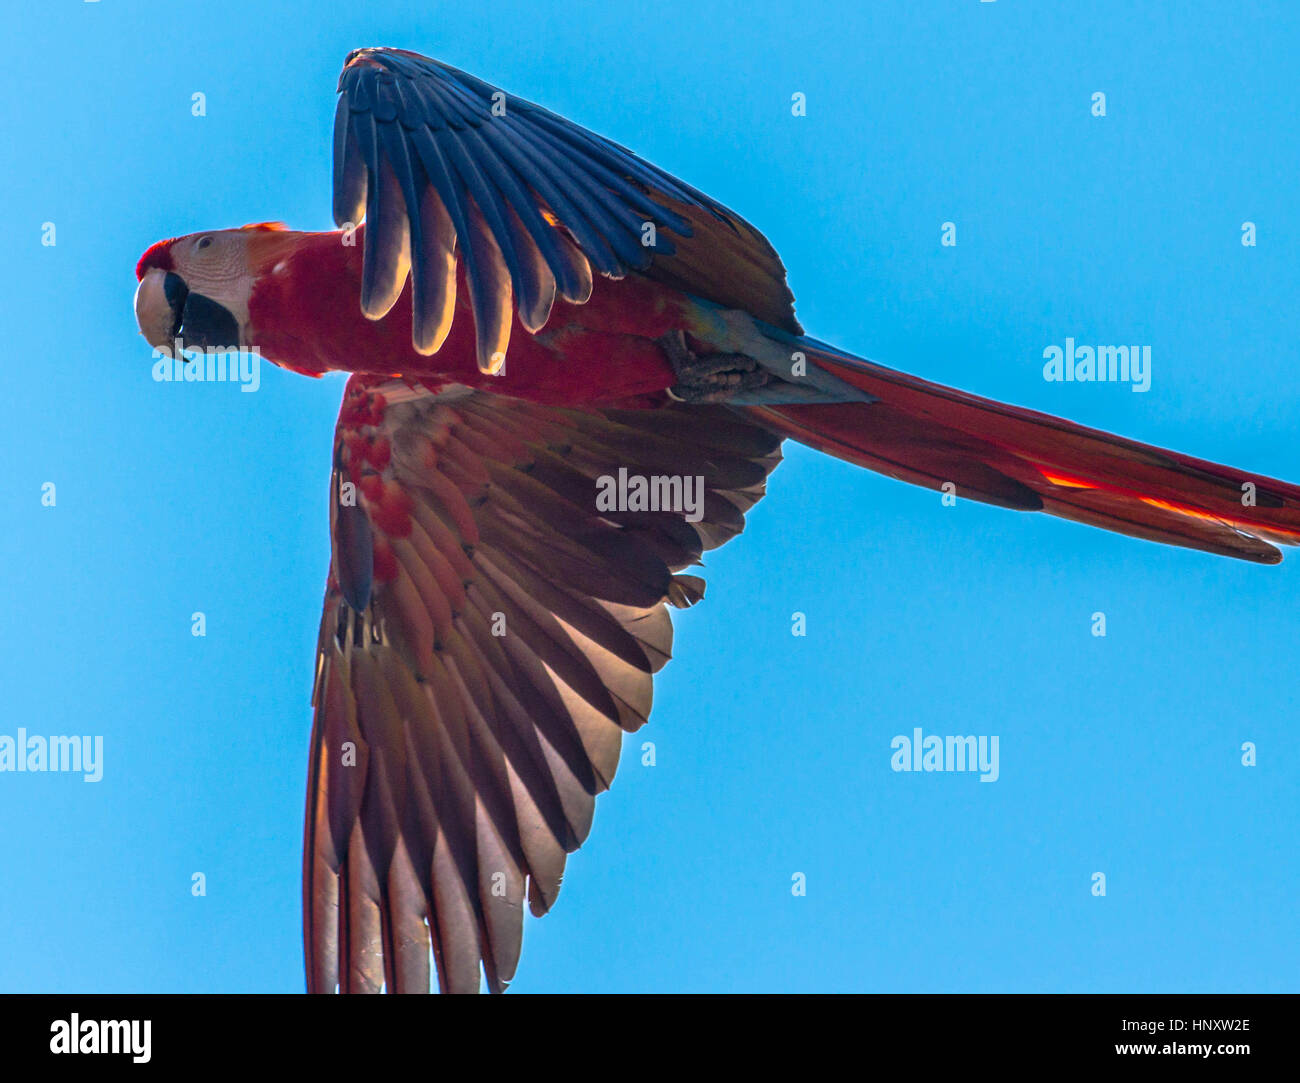 Brightly coloured scarlet macaw against blue sky Stock Photo